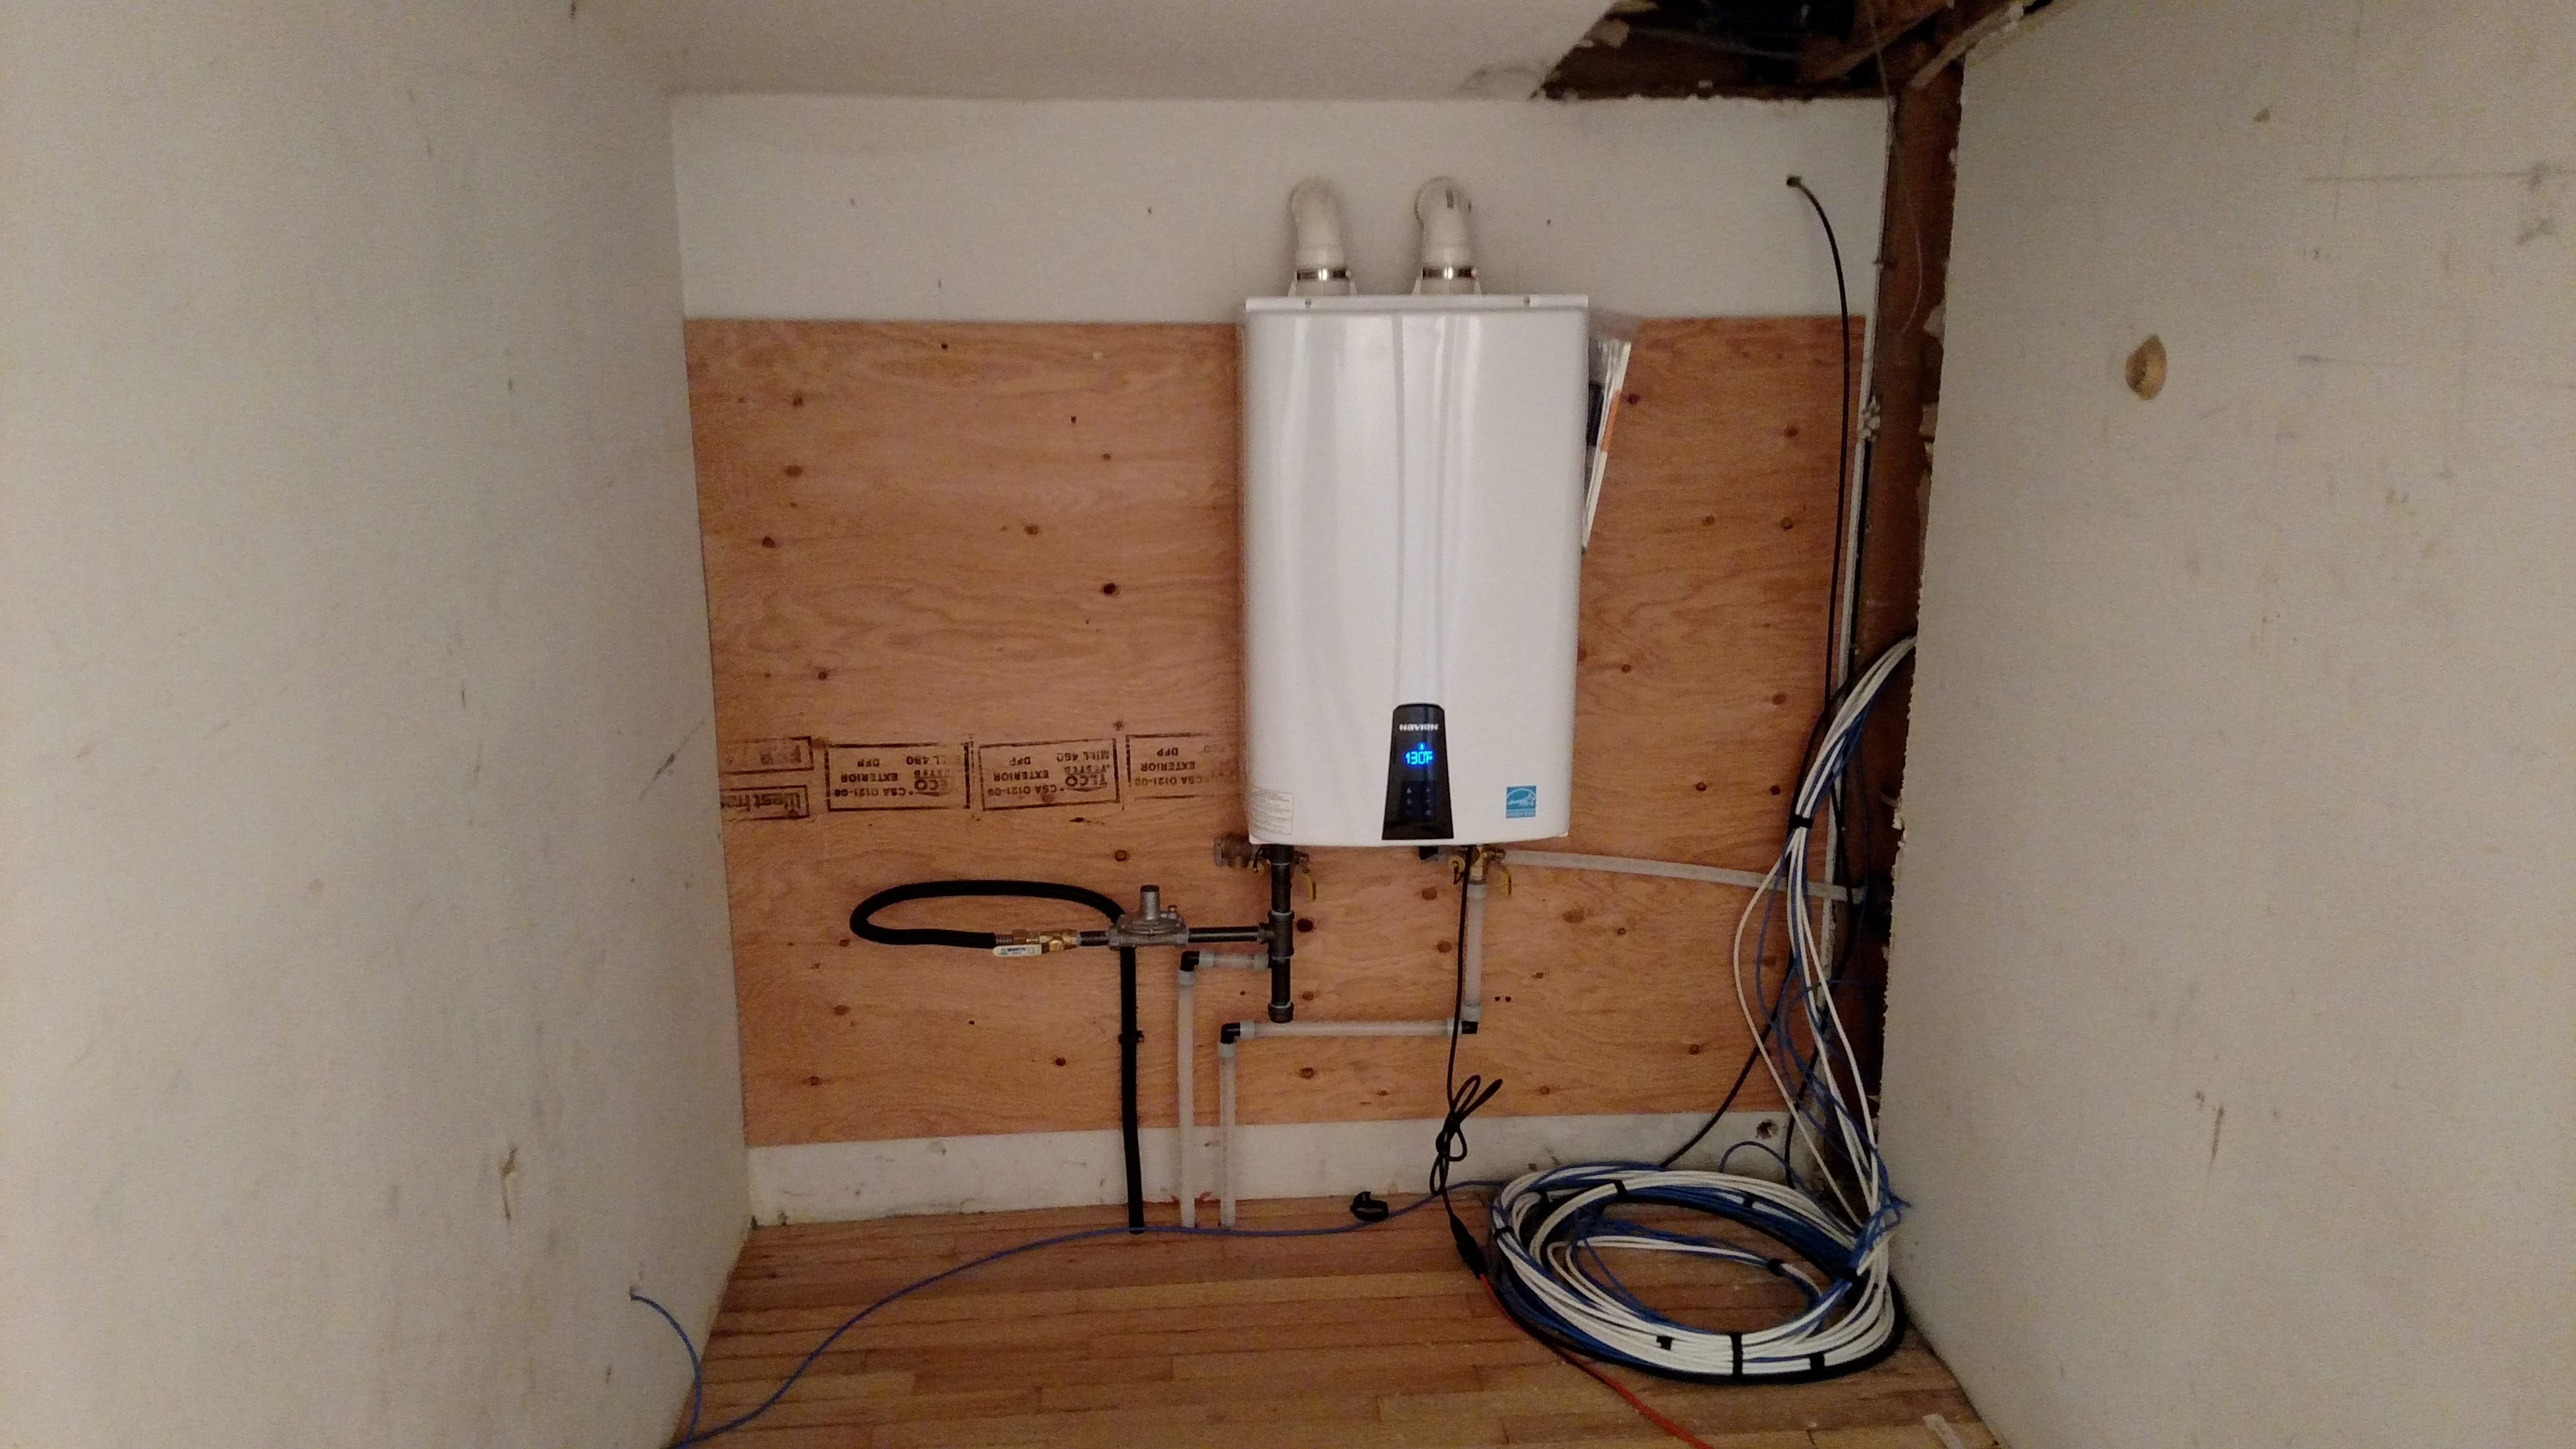 We aren't masters of all crafts, so we got a plumber to do this new instant hot water heater after the old tank heater died right when I arrived home.